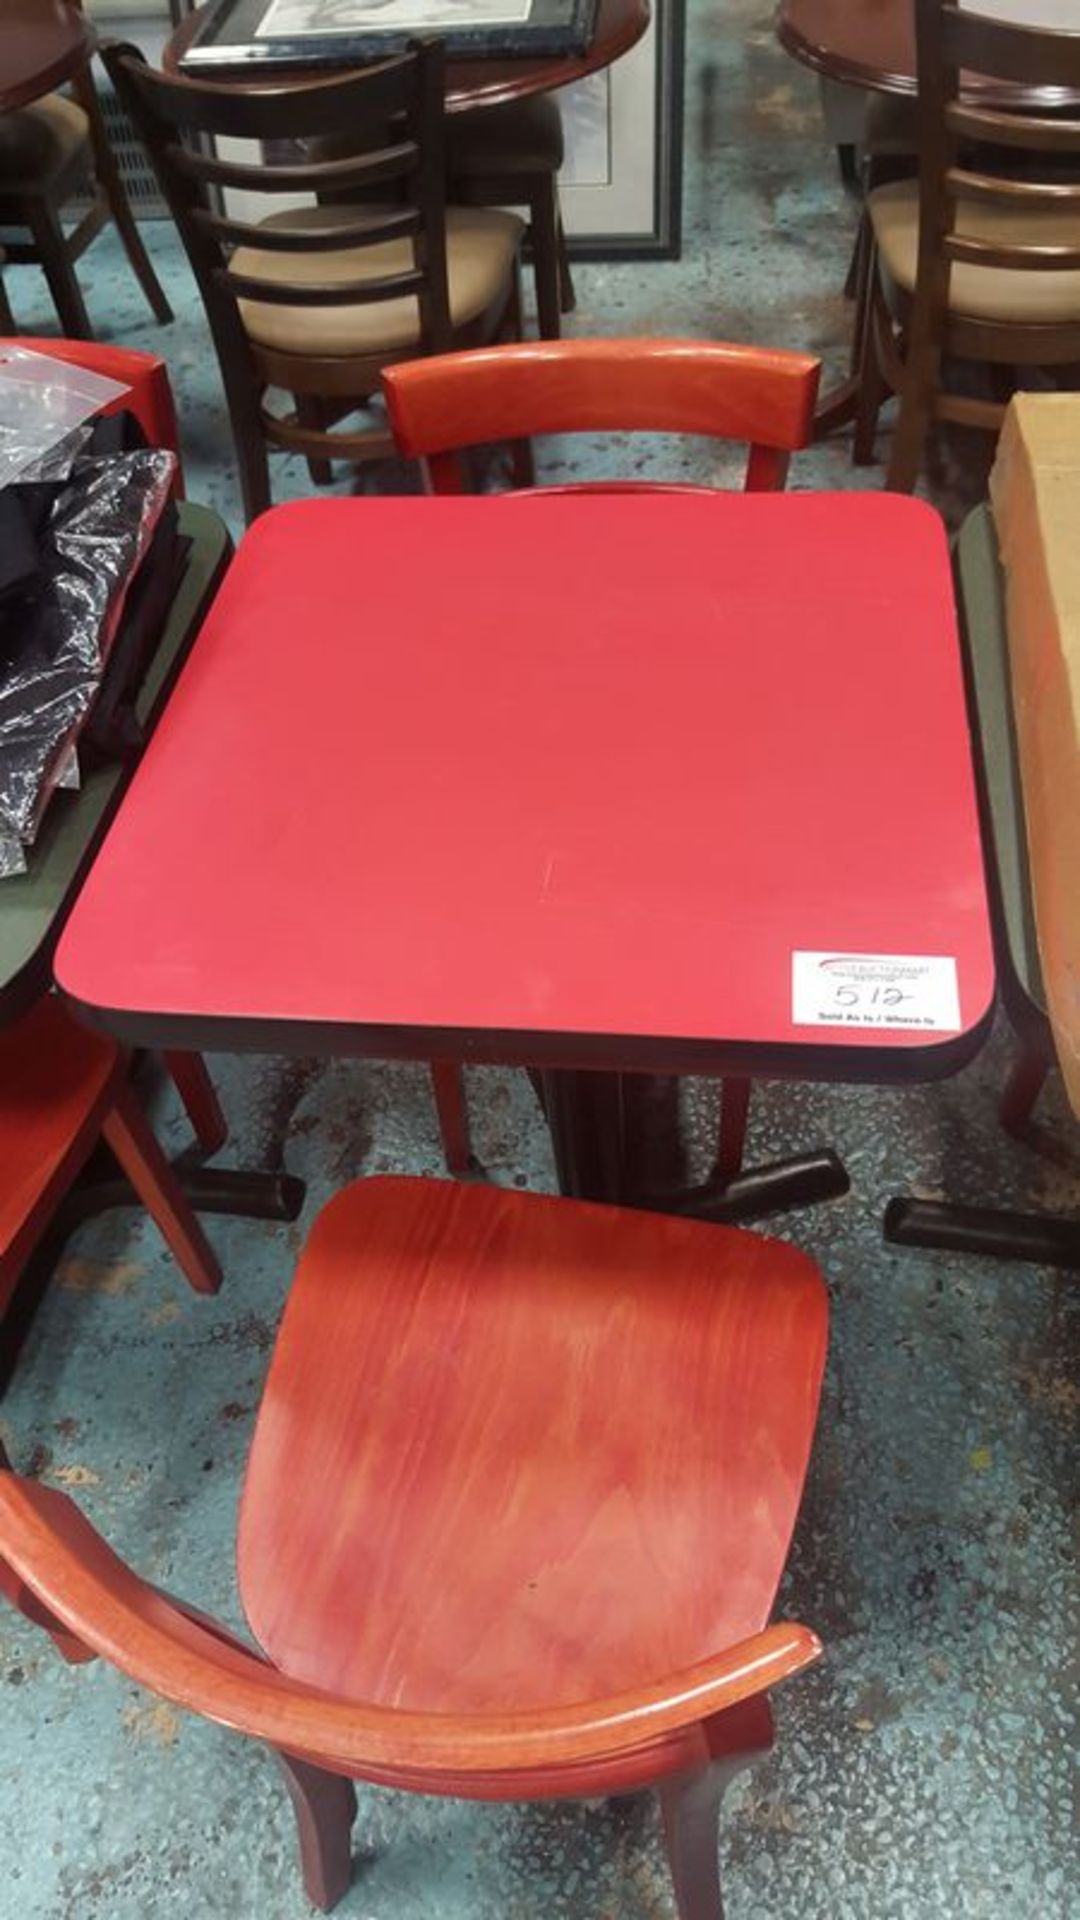 6 - Approx 24 x 24" Red top tables with metal bases = Price per table times 6